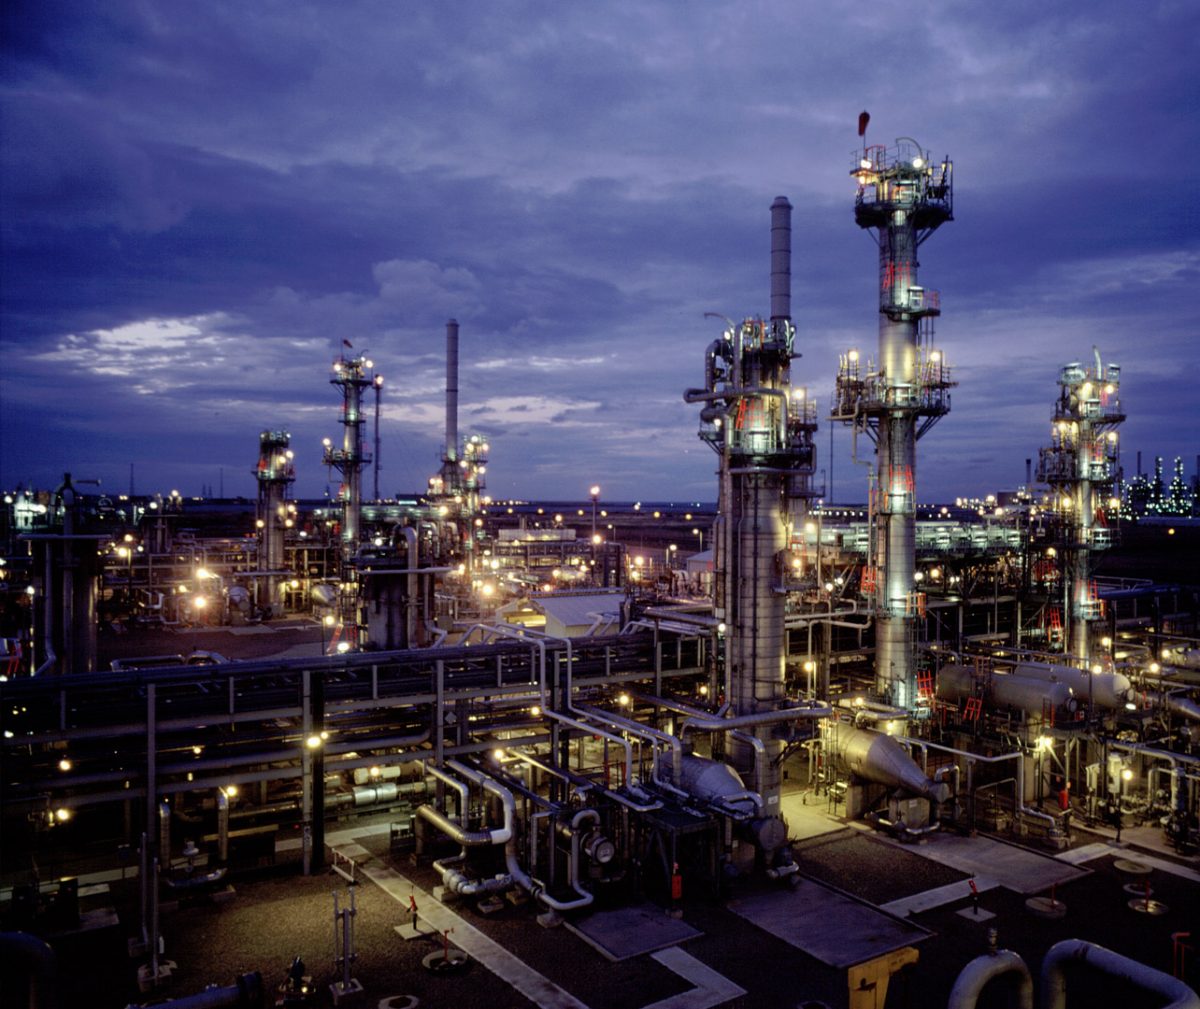 An industrial refinery complex illuminated at dusk. The scene features numerous tall distillation columns, interconnected pipes, and machinery. Bright lights from the facility create a stark contrast against the darkening sky.